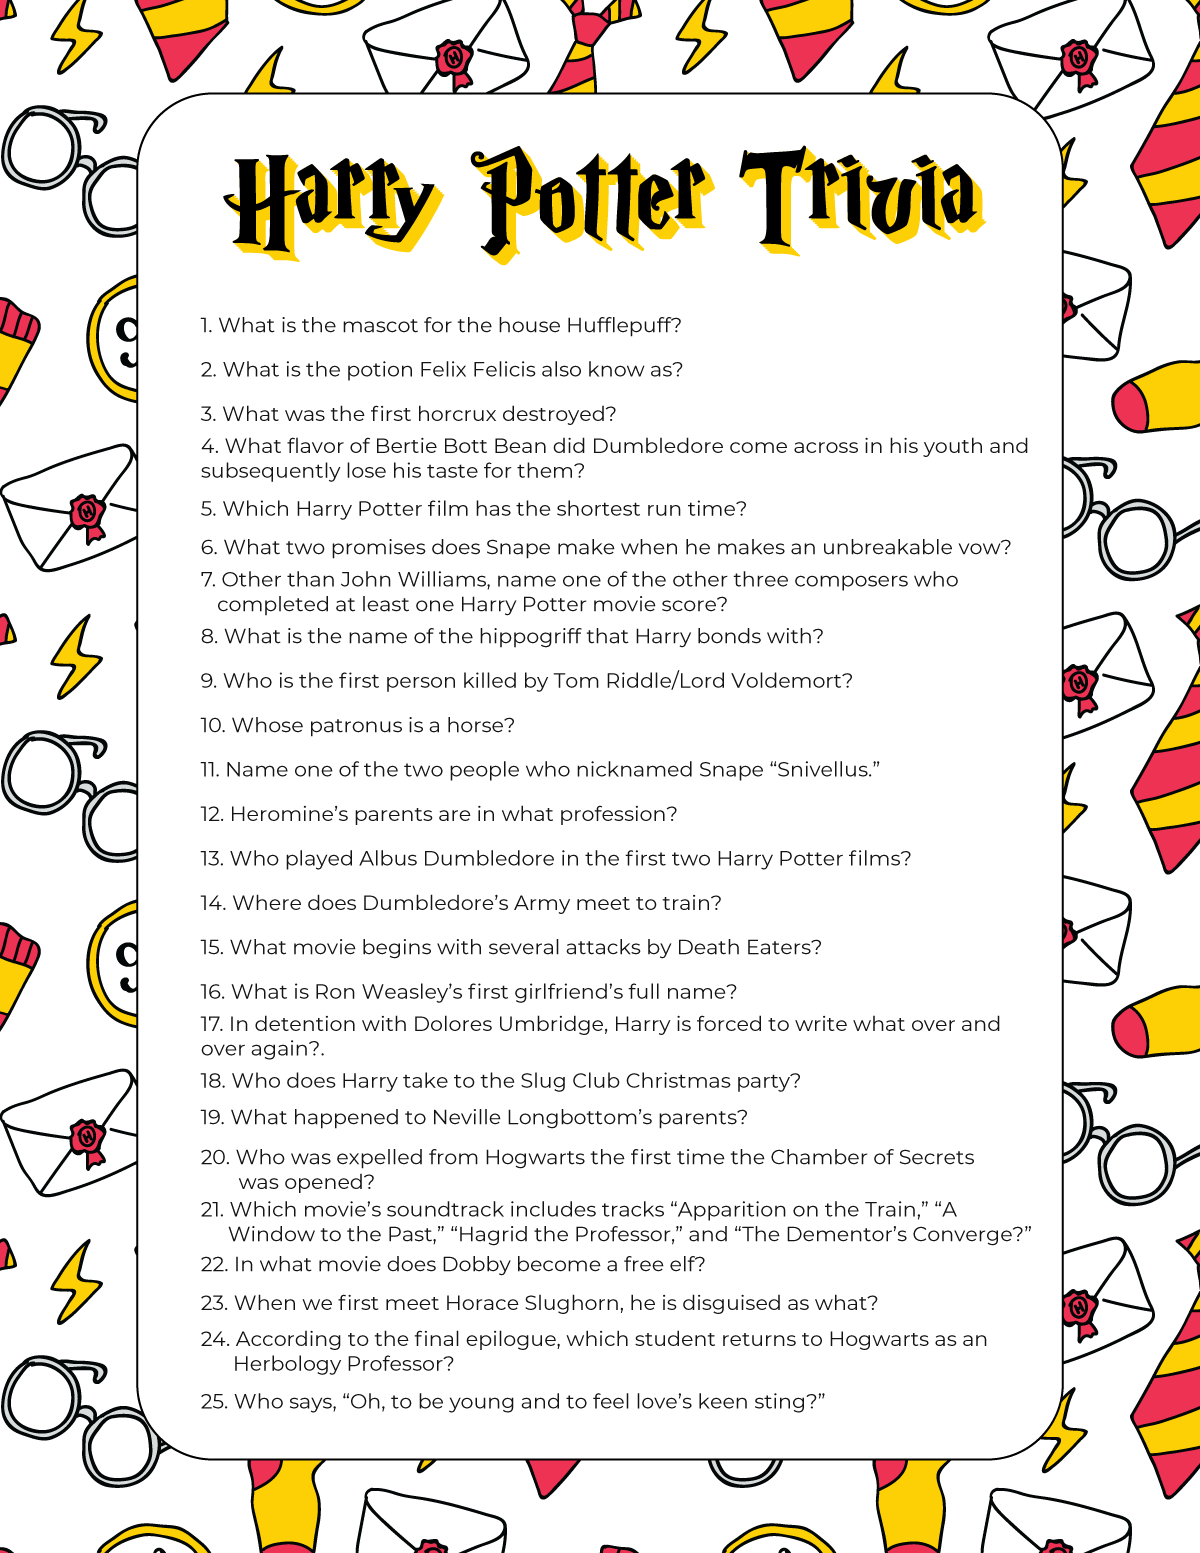 Harry Potter Trivia Questions for All Ages  Free Printable   - 93